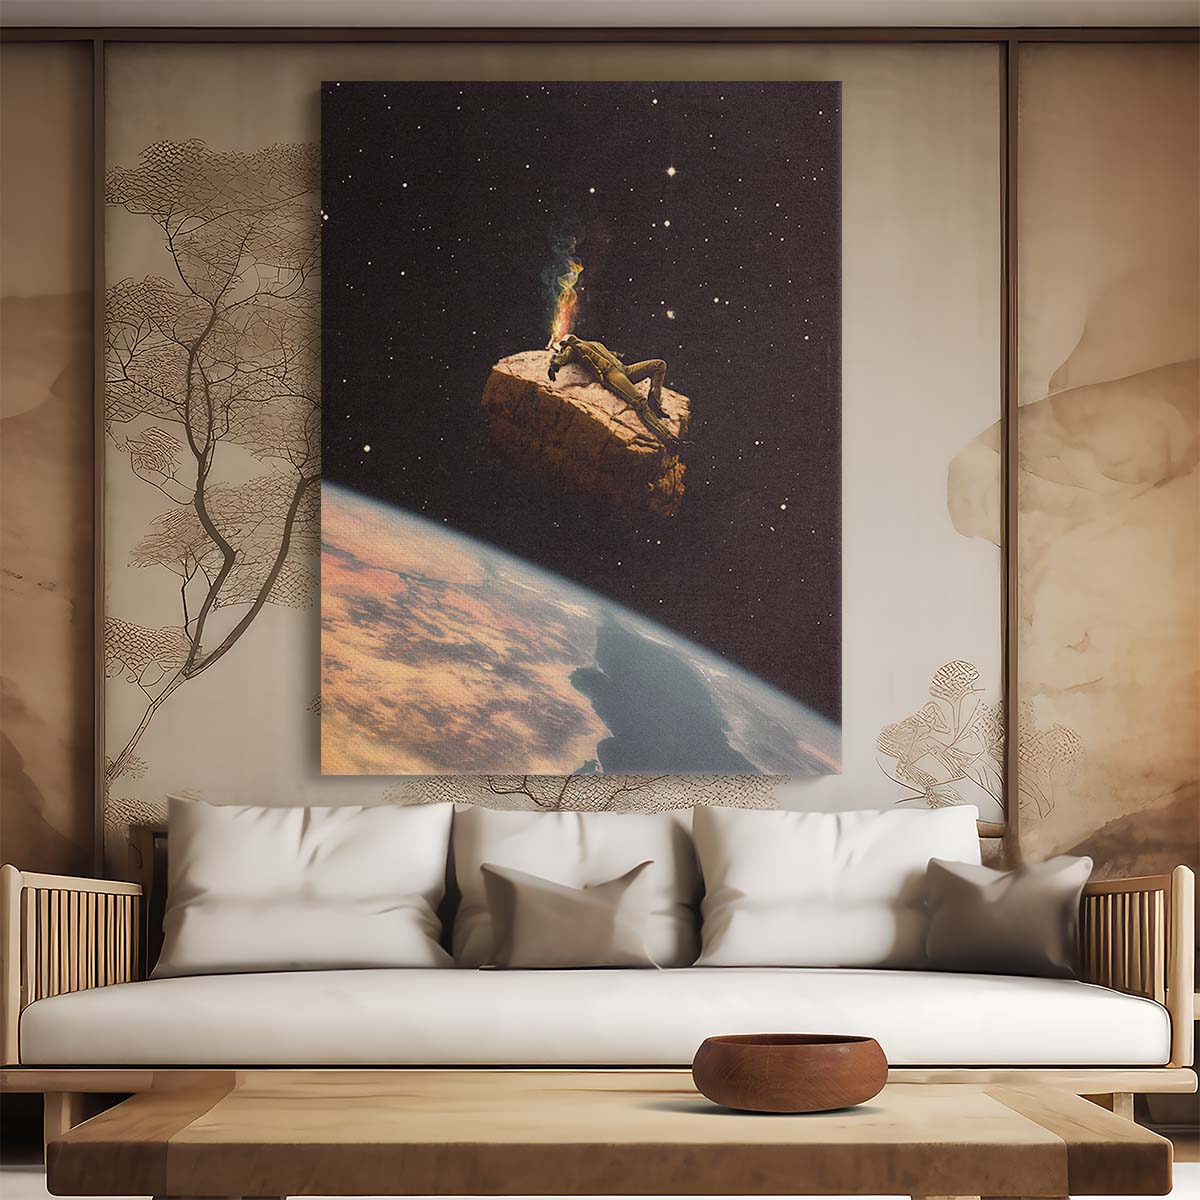 Surrender Futuristic Space Adventure Digital Collage Art by Taudalpoi by Luxuriance Designs, made in USA